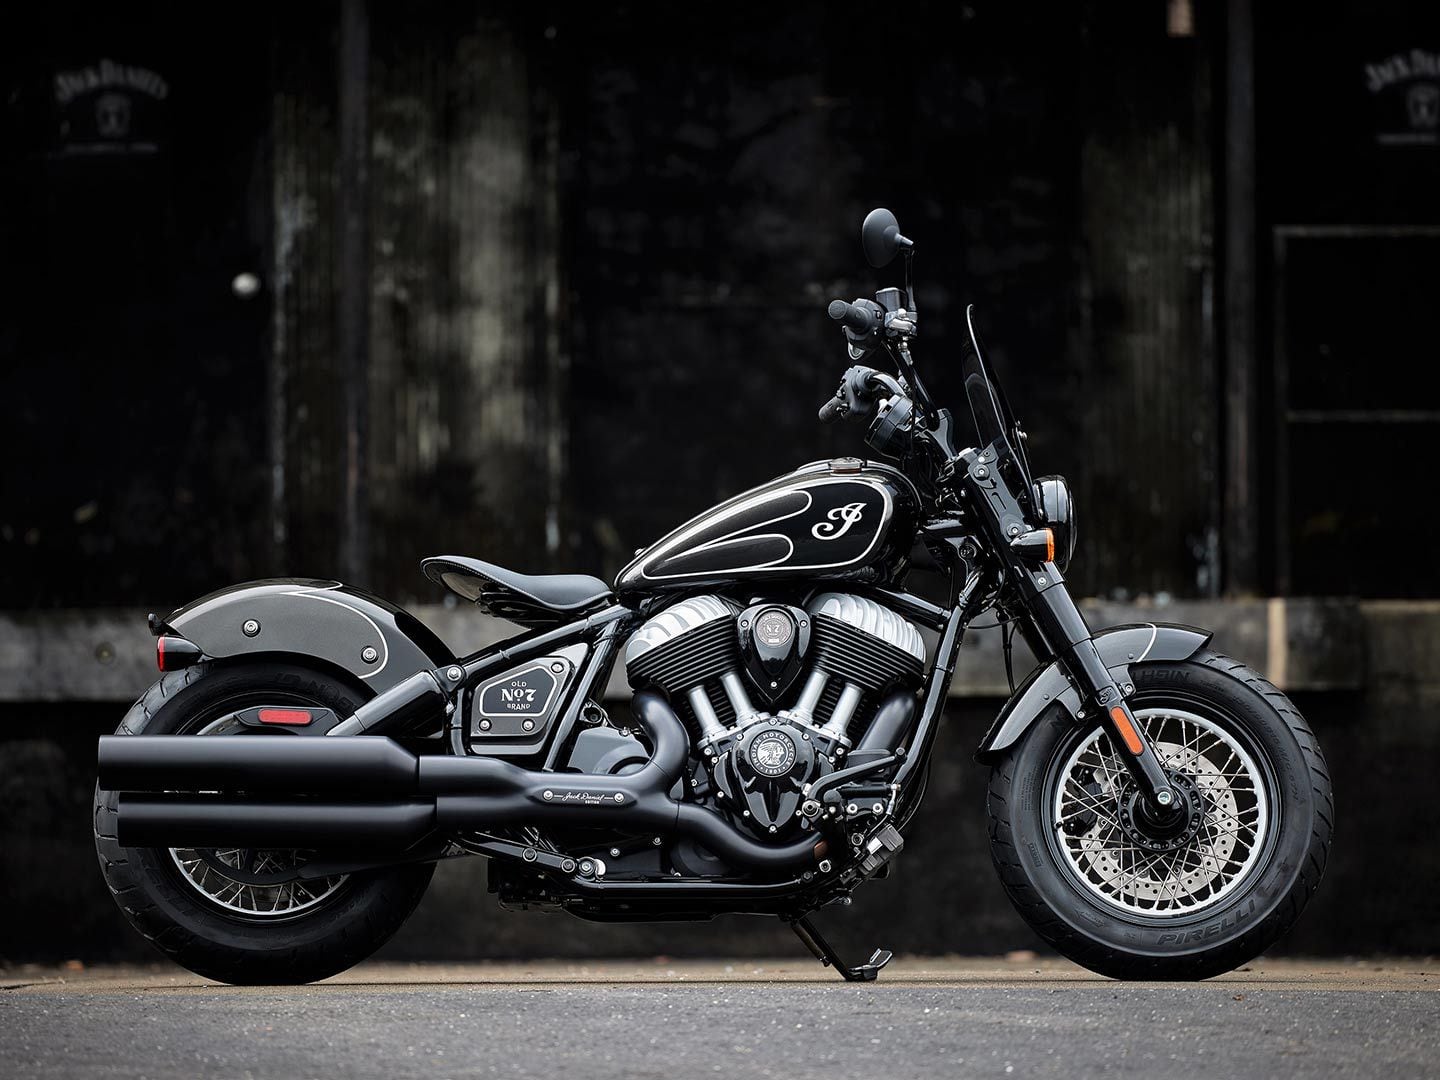 2023 Jack Daniels Indian Chief Bobber Dark Horse is a limited-edition model of the Chief Bobber Dark Horse.